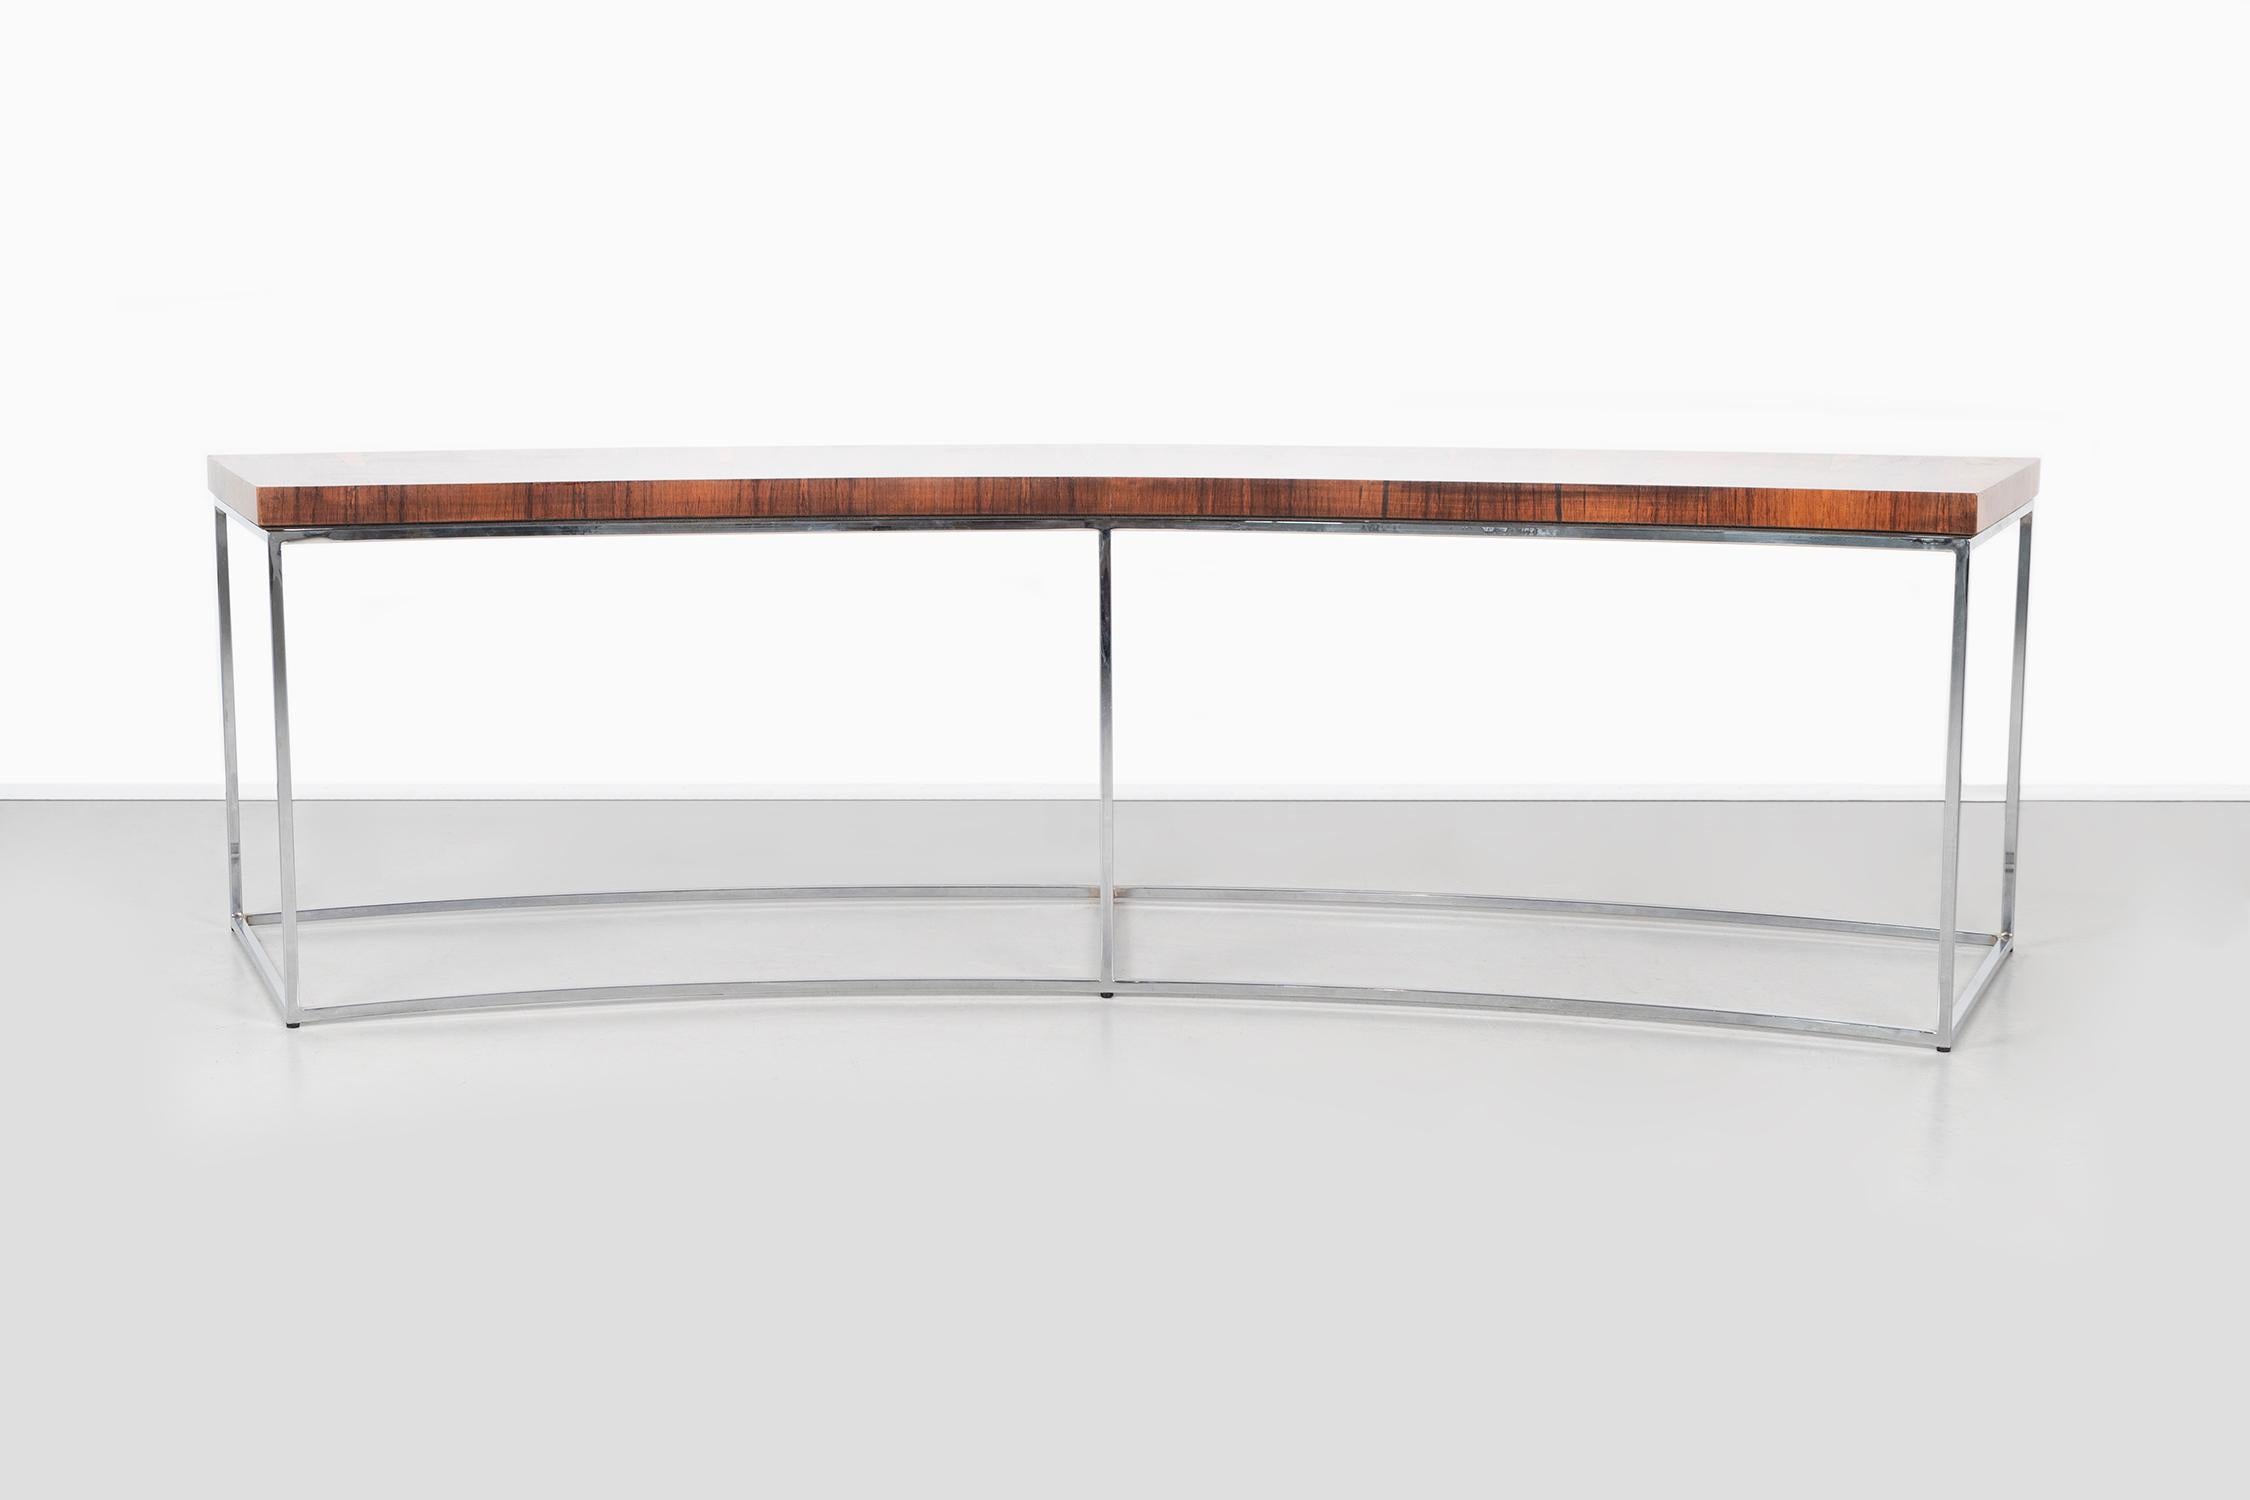 Bench

Designed by Milo Baughman for Thayer Coggin

USA, circa 1970s

Rosewood and chromed steel base

Measure: 20